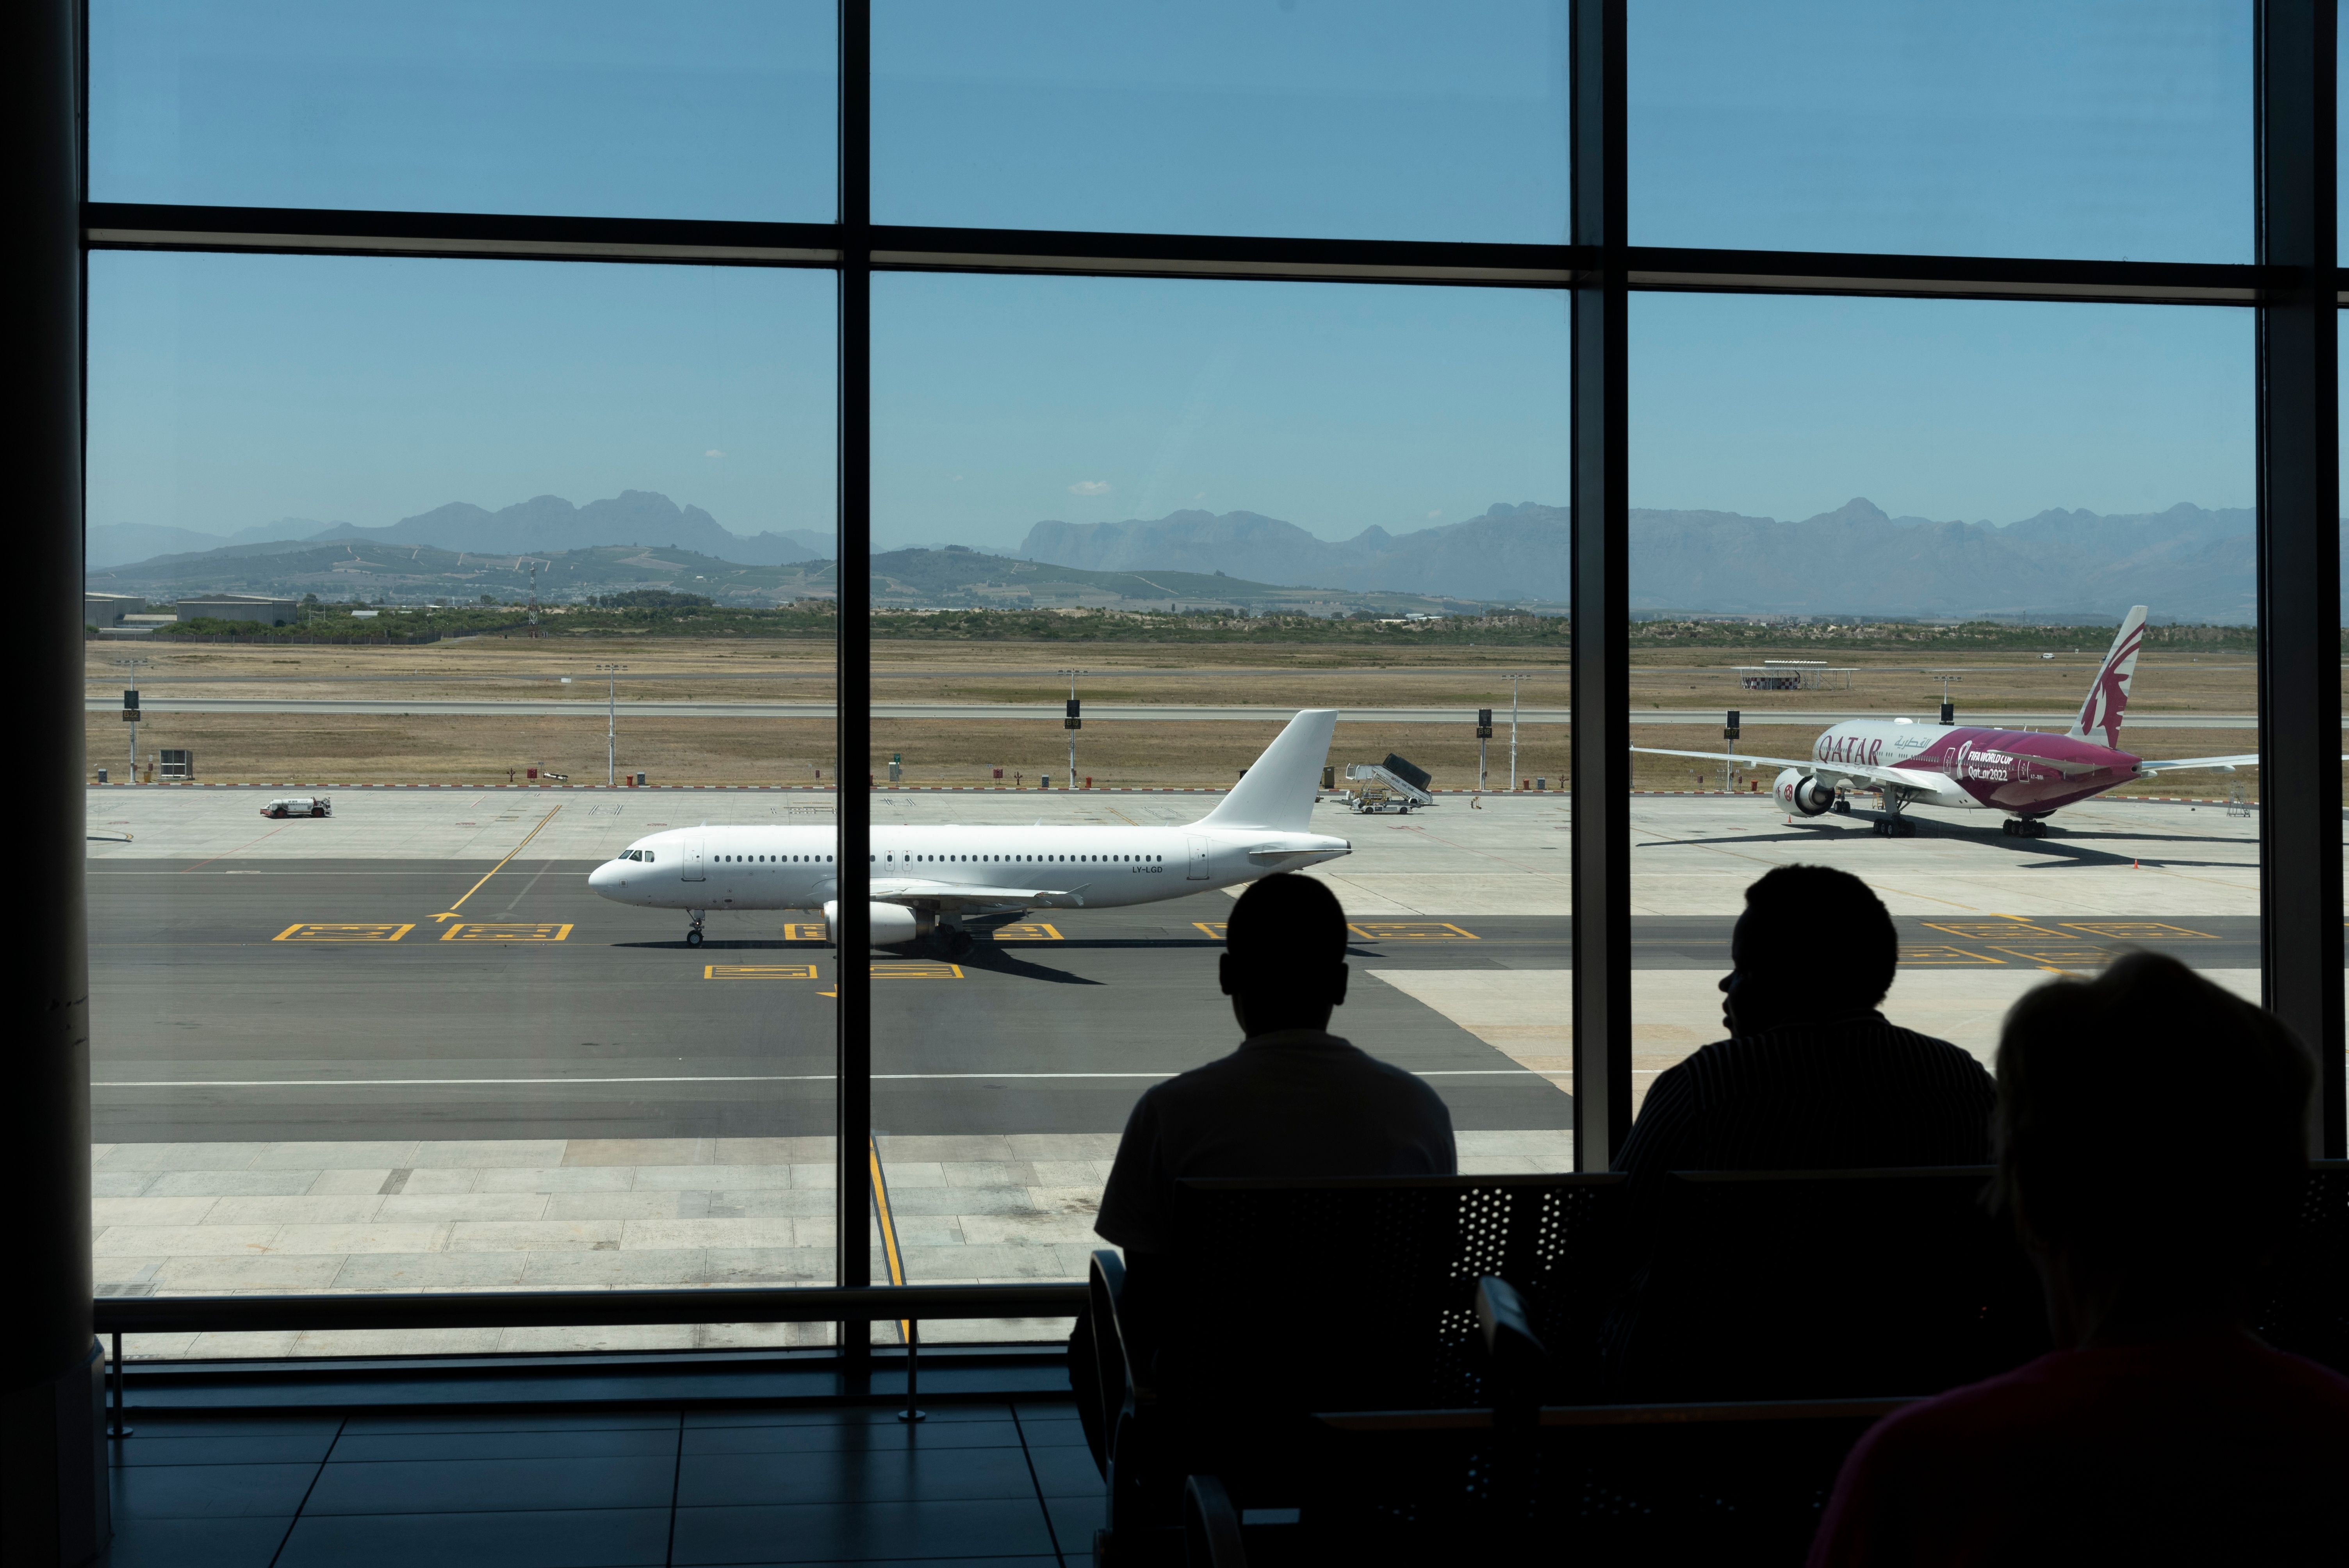 Cape Town South Africa. 2023. Spectators sitting in airport viewing area watch aircraft movements and spectacular view.